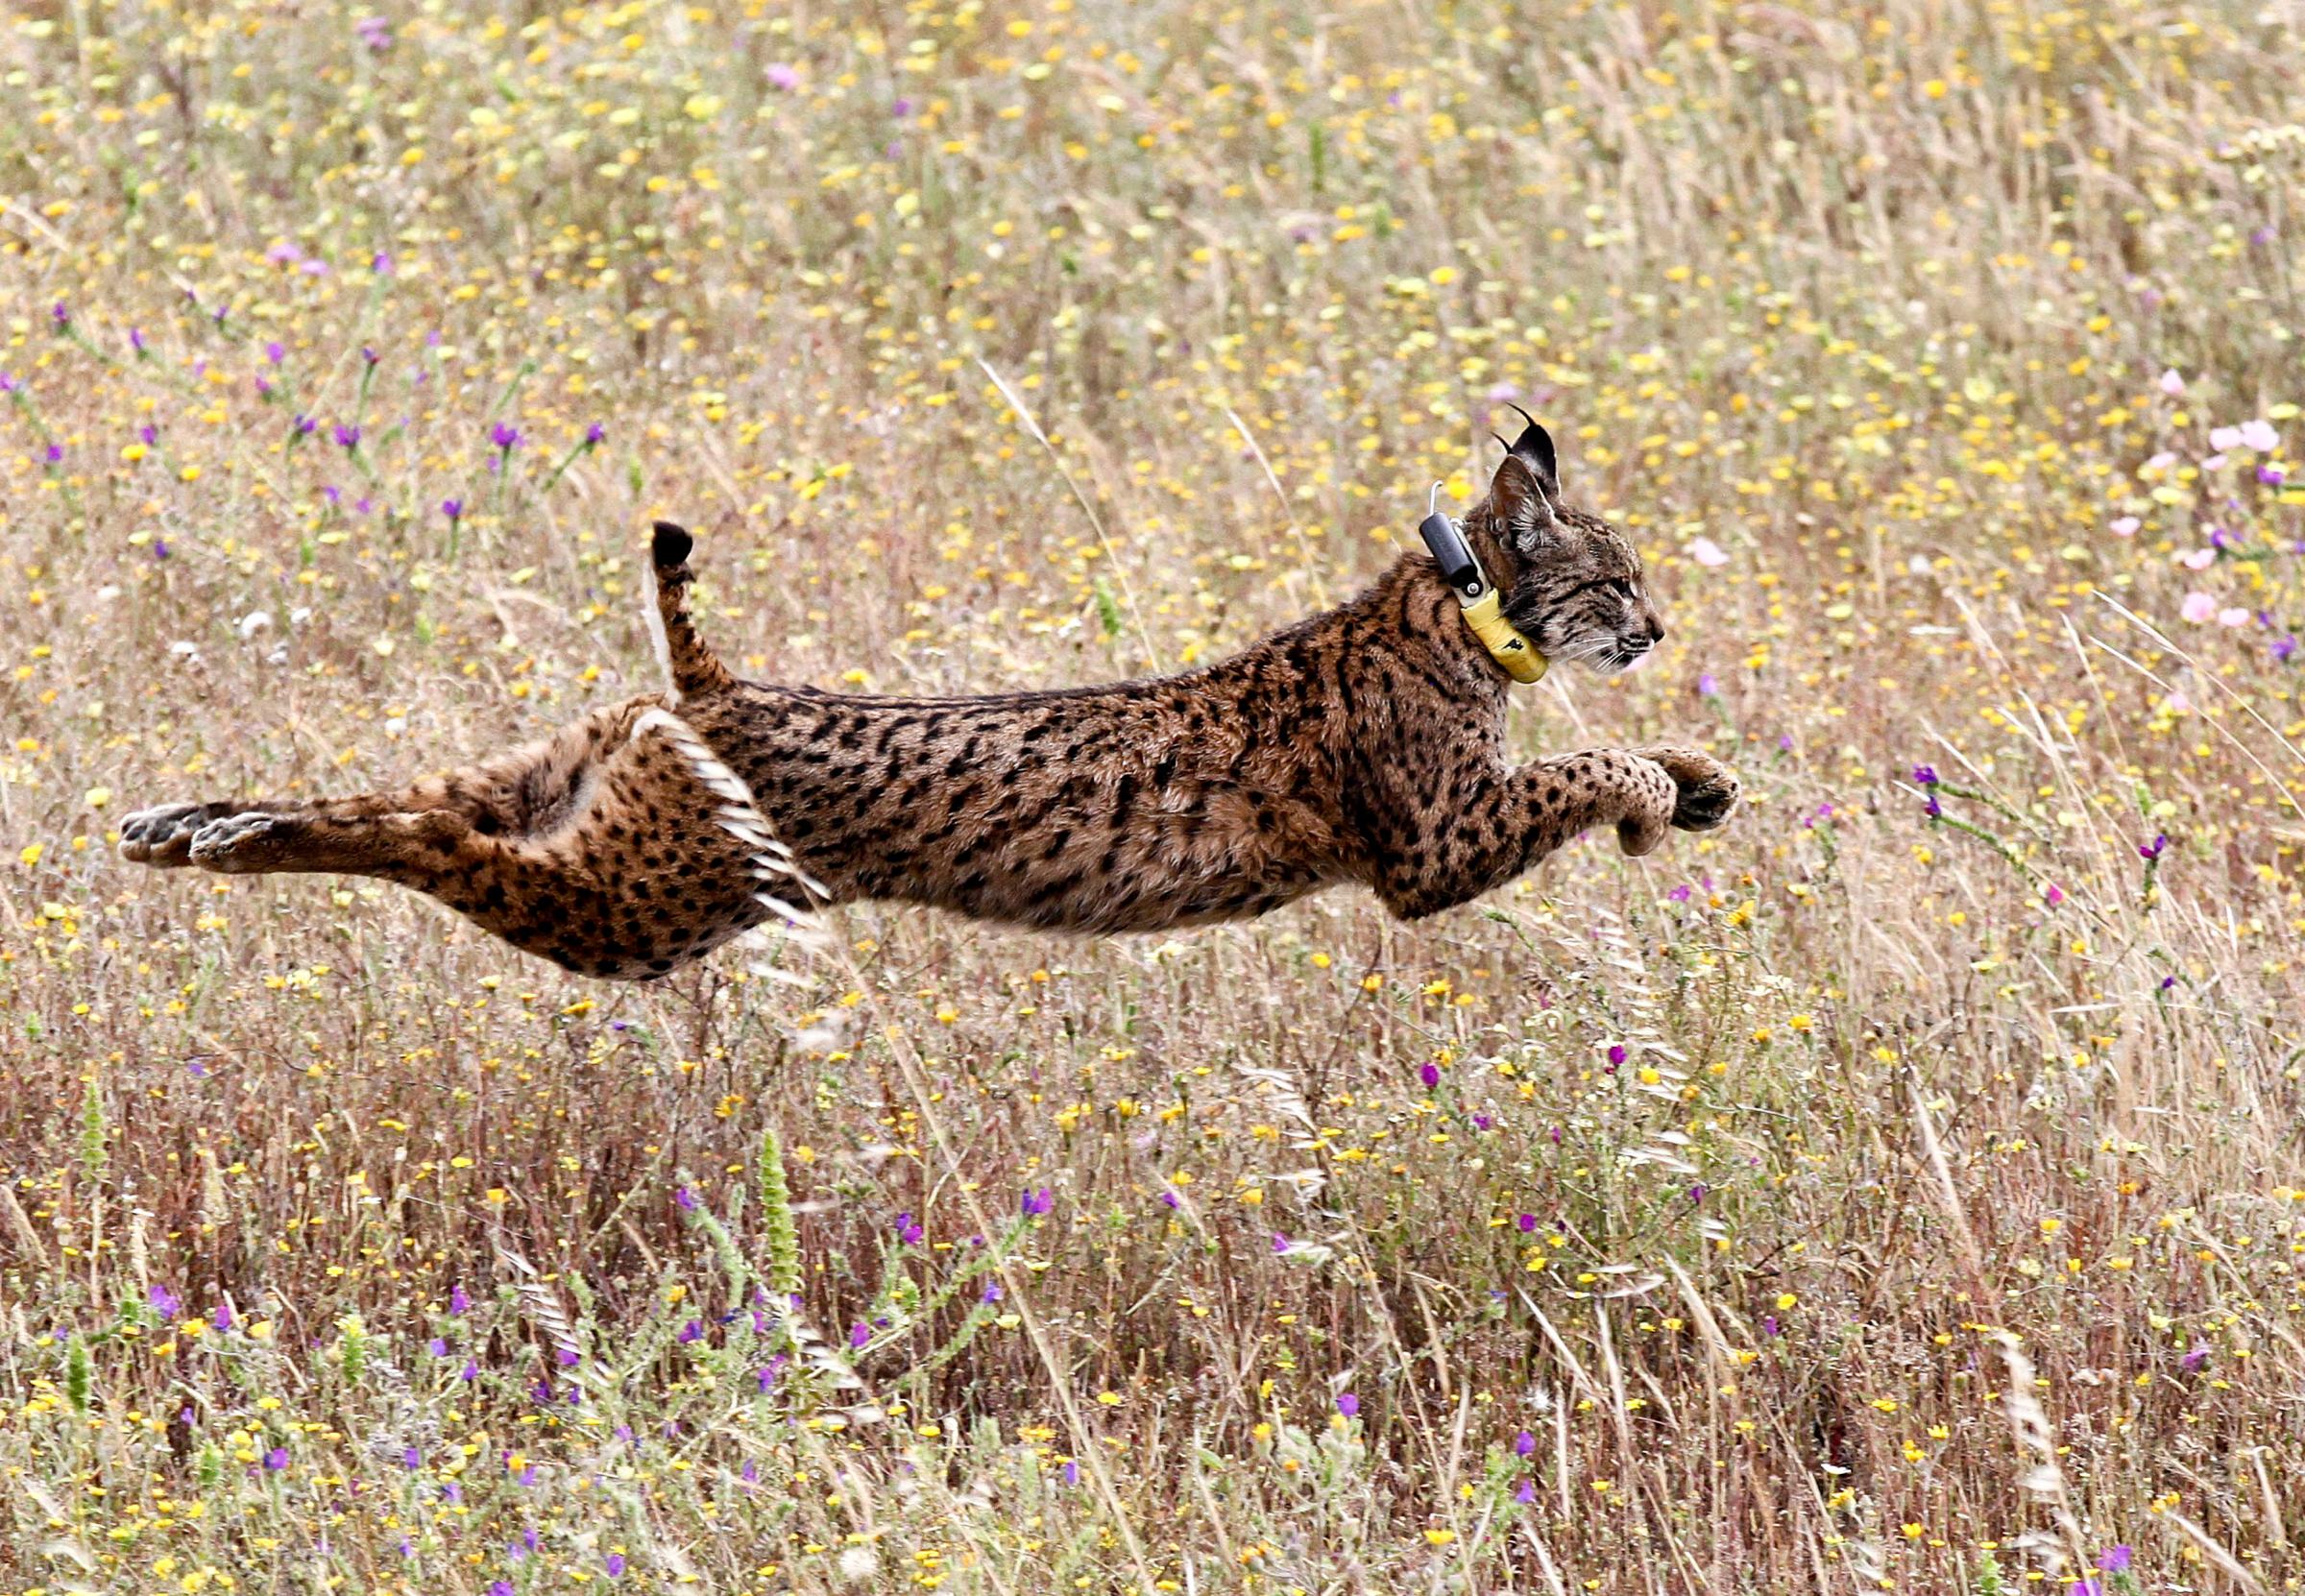 A Iberian lynx named Mistral jumps in a field after being released by Portugal's Minister of Environment Joao Matos Fernandes and others in the Mount Milhouro region in Mertola, Portugal, on May 13, 2016.